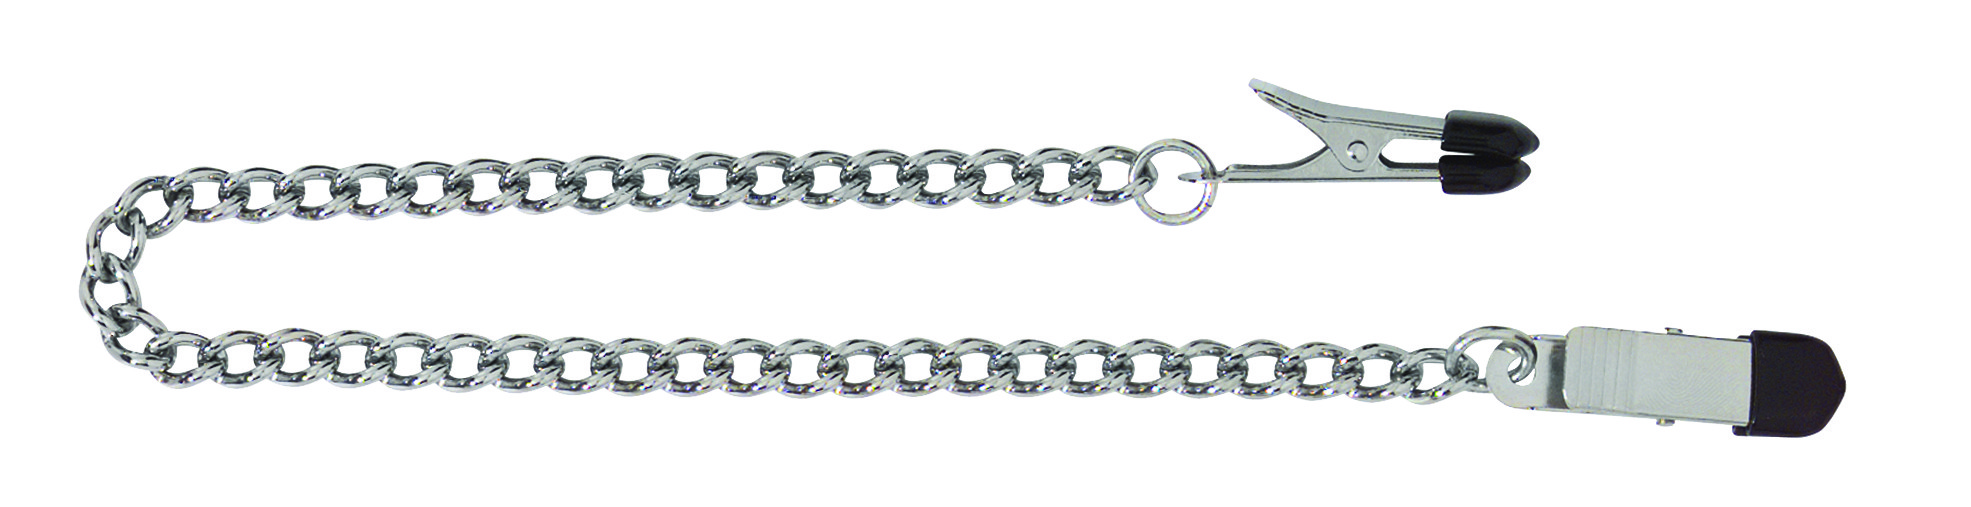 Endurance Broad Tip Clamps - Link Chain